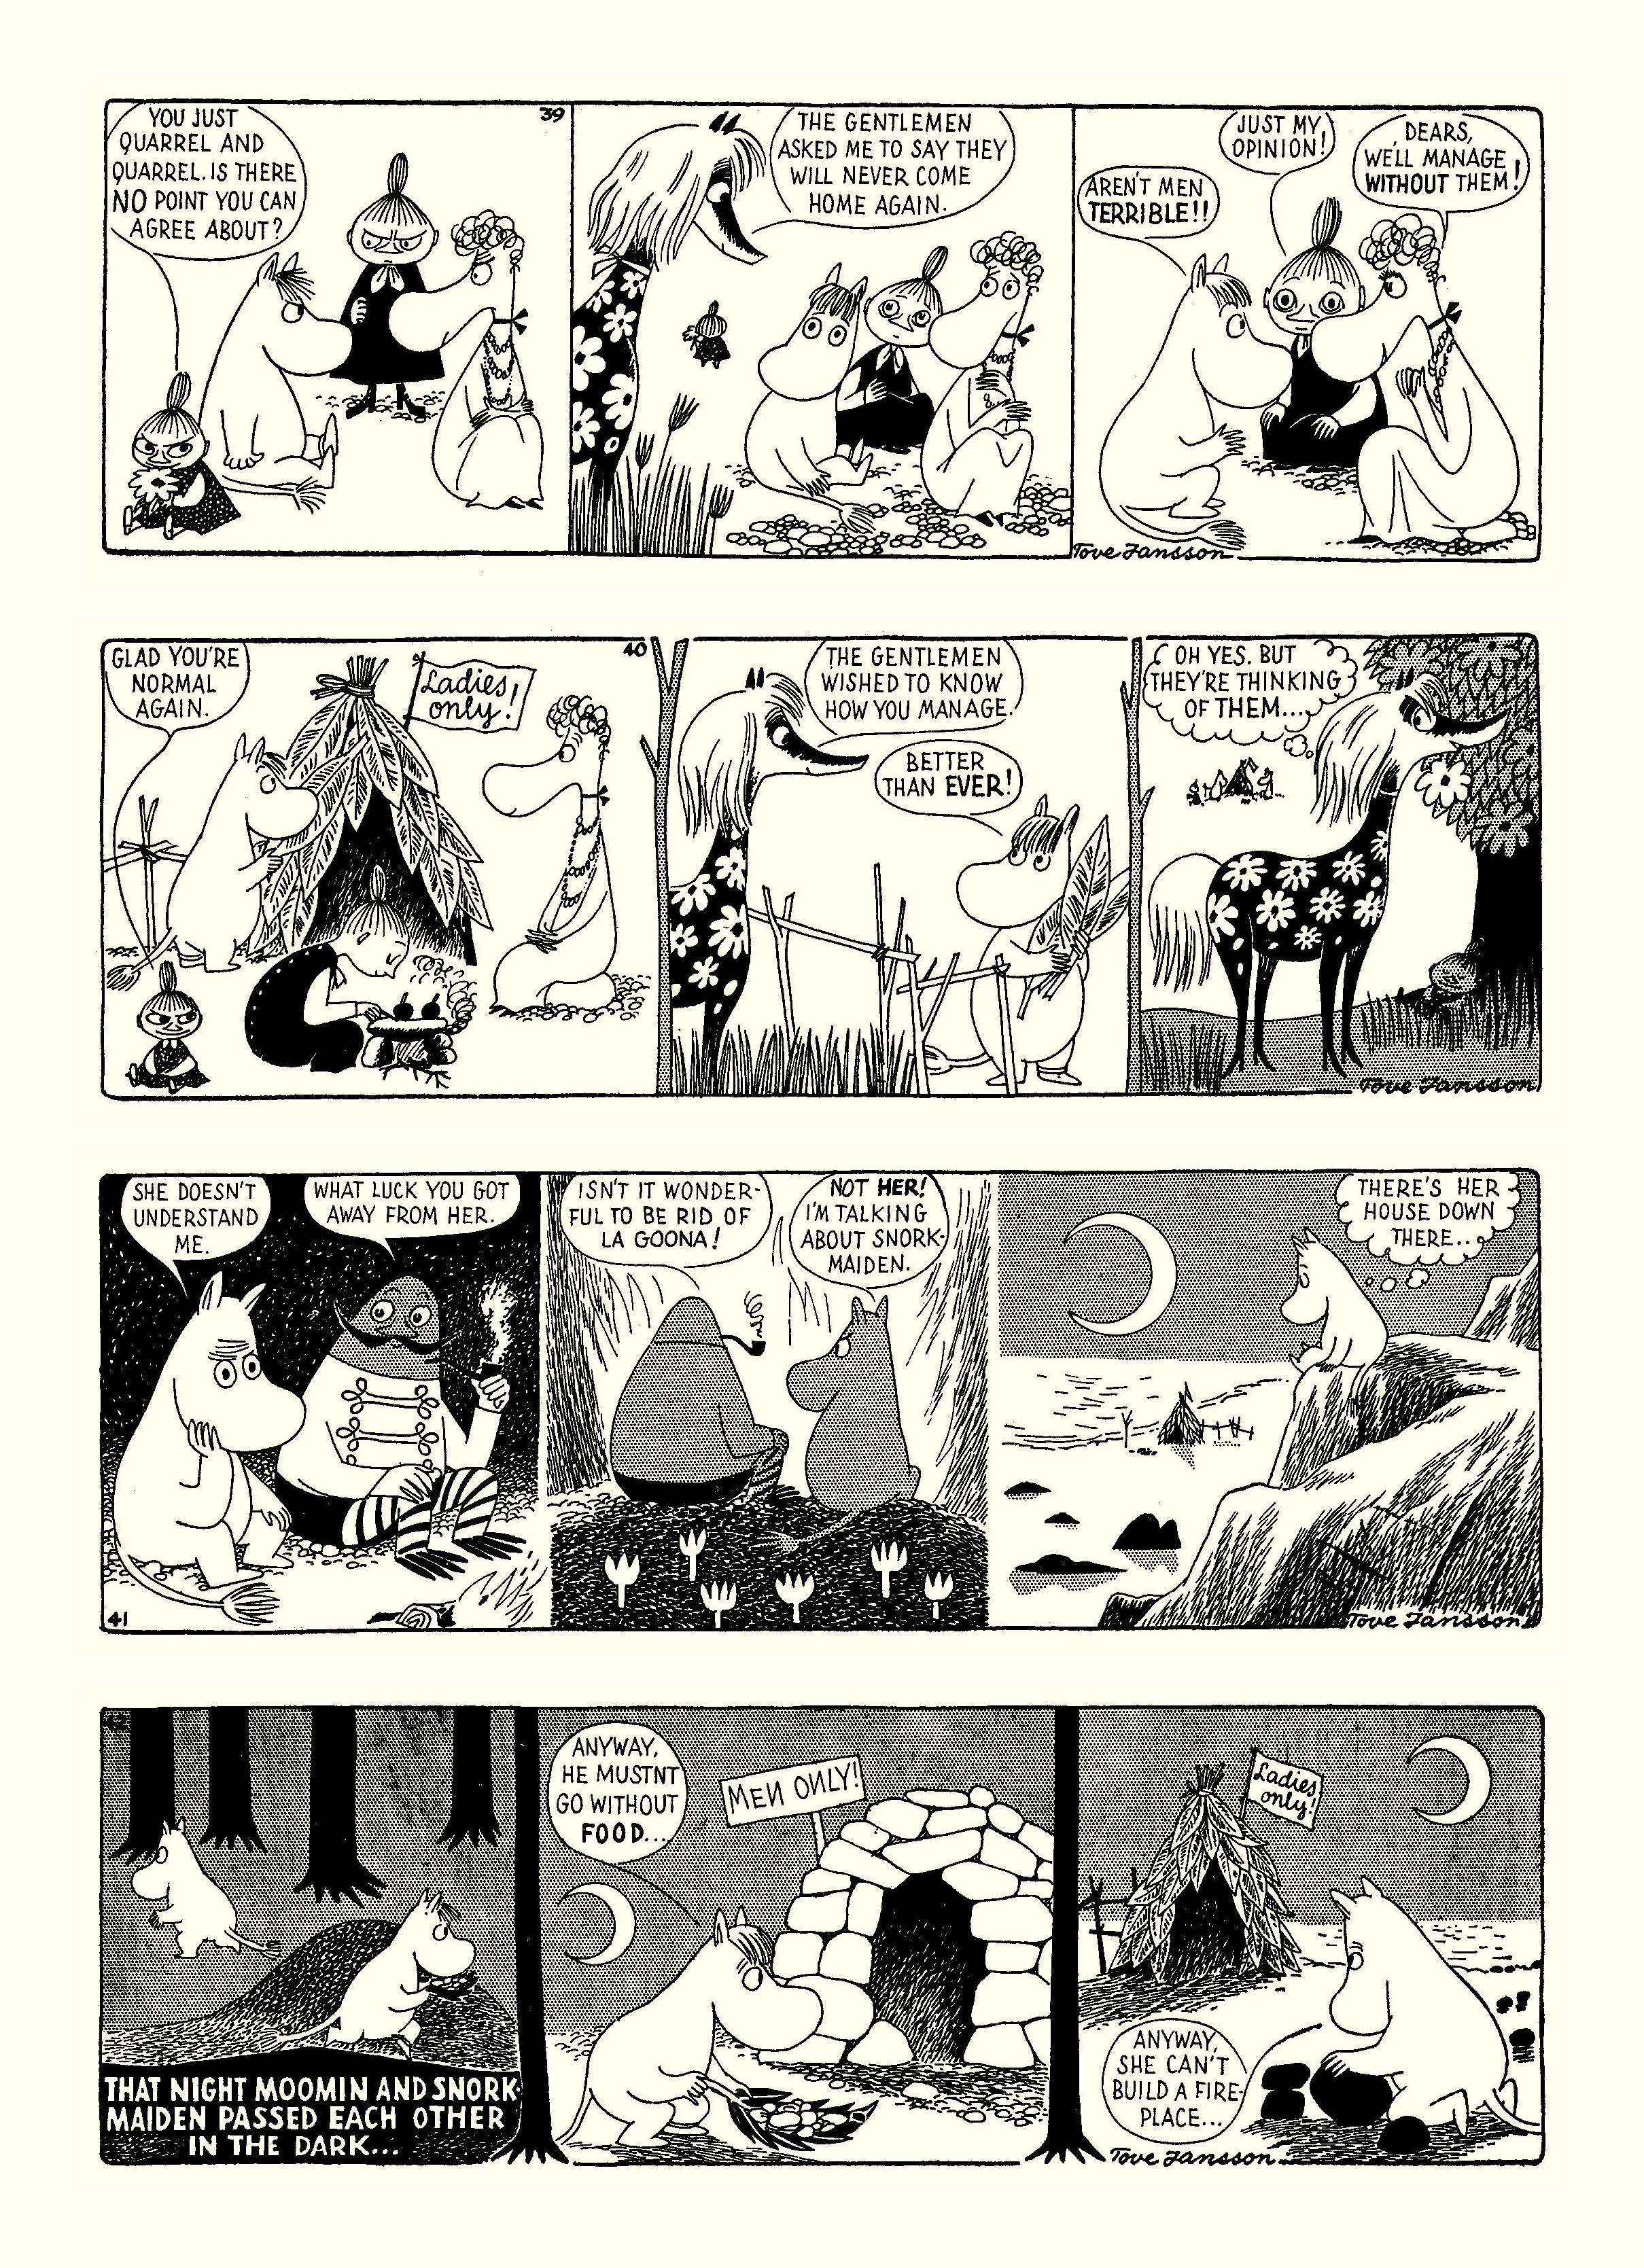 Read online Moomin: The Complete Tove Jansson Comic Strip comic -  Issue # TPB 3 - 16